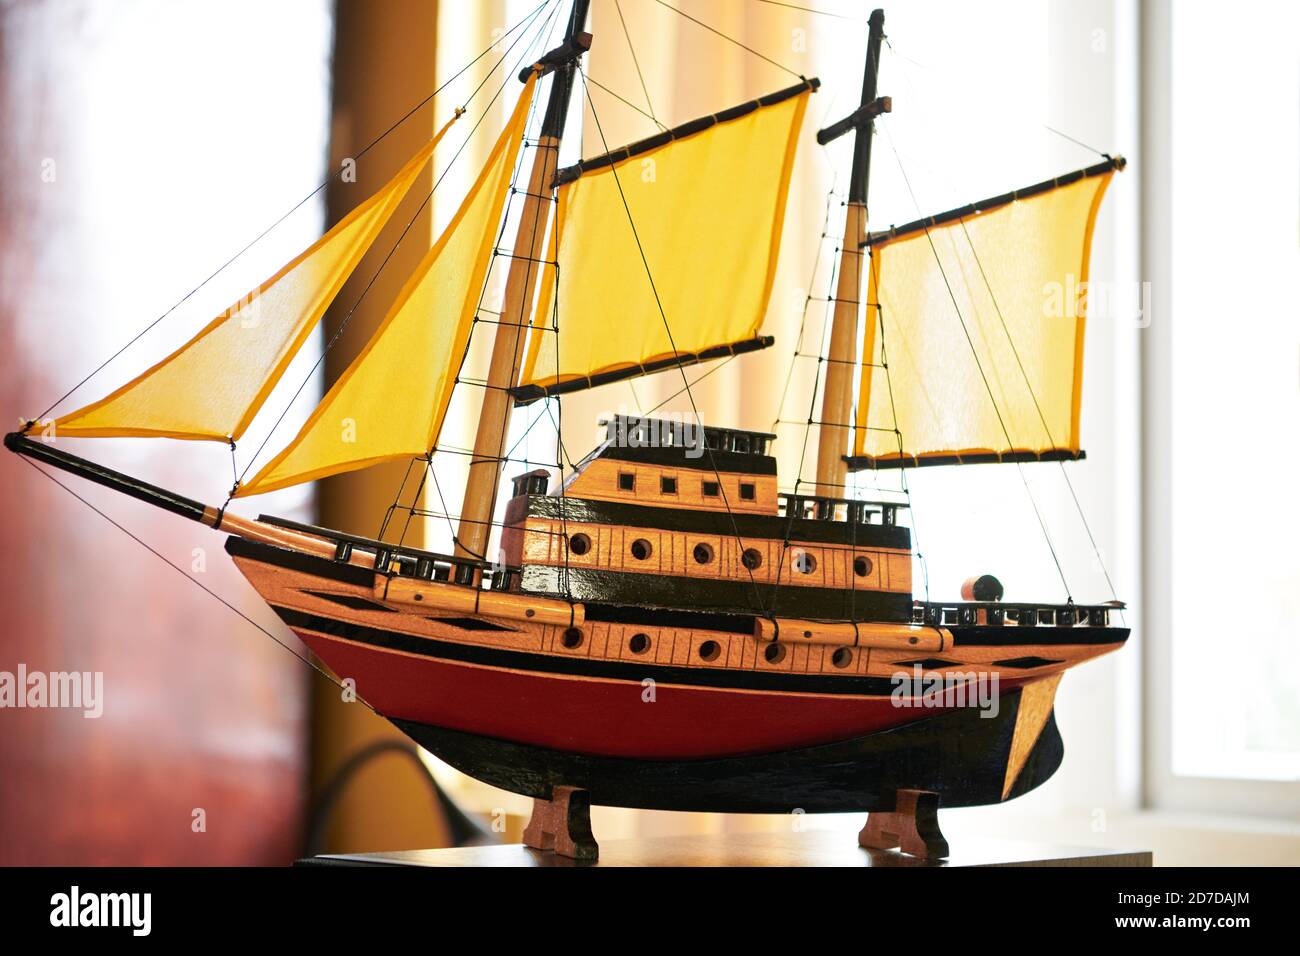 Close-up view of a miniature wooden sailboat with yellow sails, sold as souvenir in touristic places and souvenir shops around the world Stock Photo